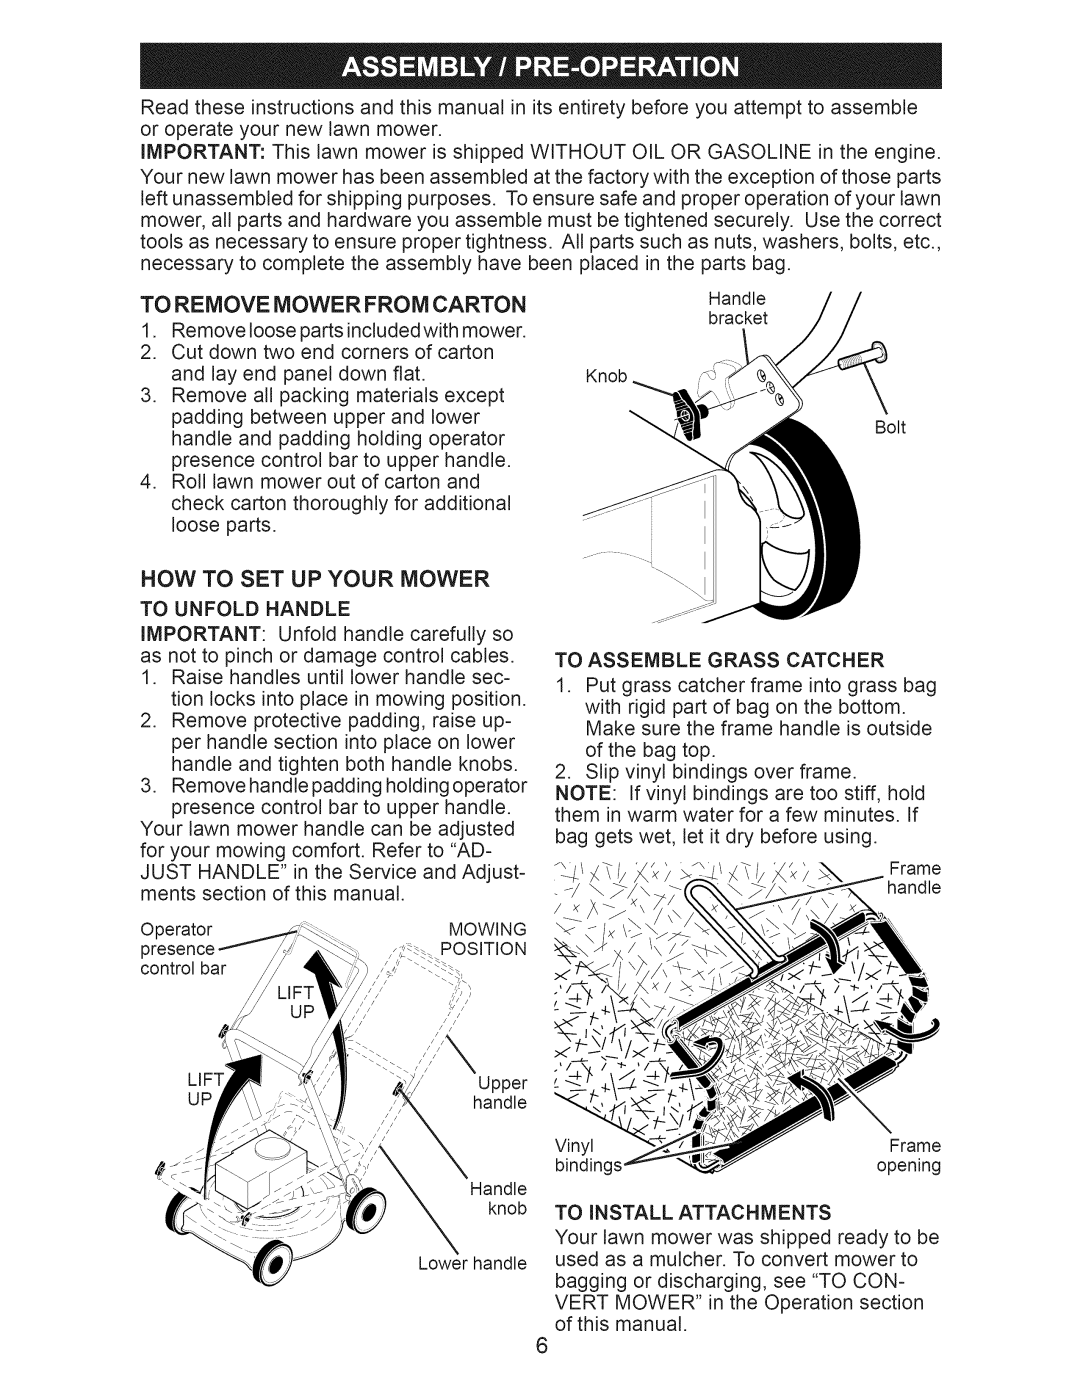 Craftsman 917.376400 owner manual To Remove Mower From Carton, Now To Set Up Your Mower 